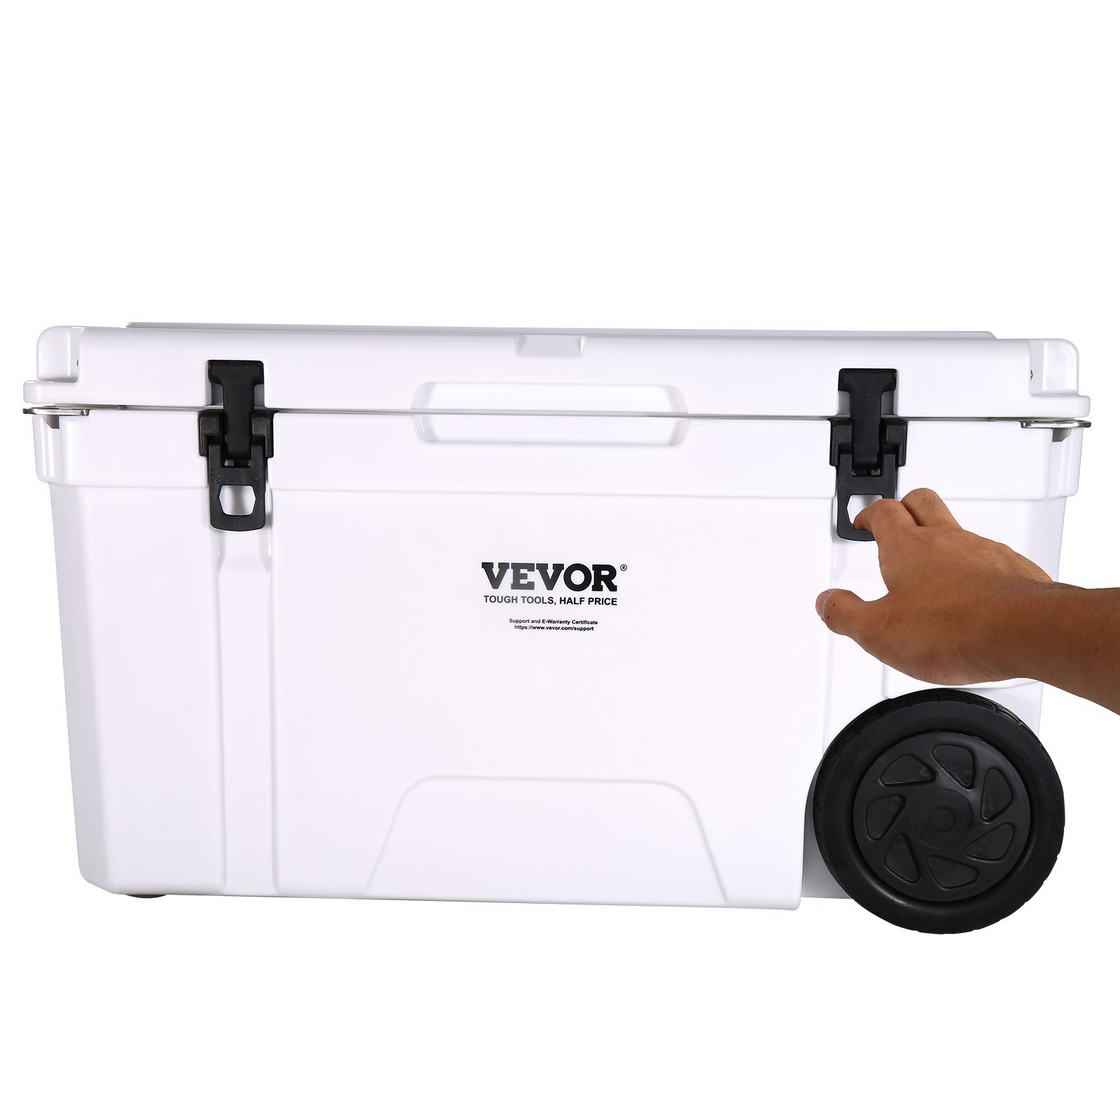 VEVOR Insulated Portable Cooler with Wheels - 65 qt - Keeps Ice for 6 Days